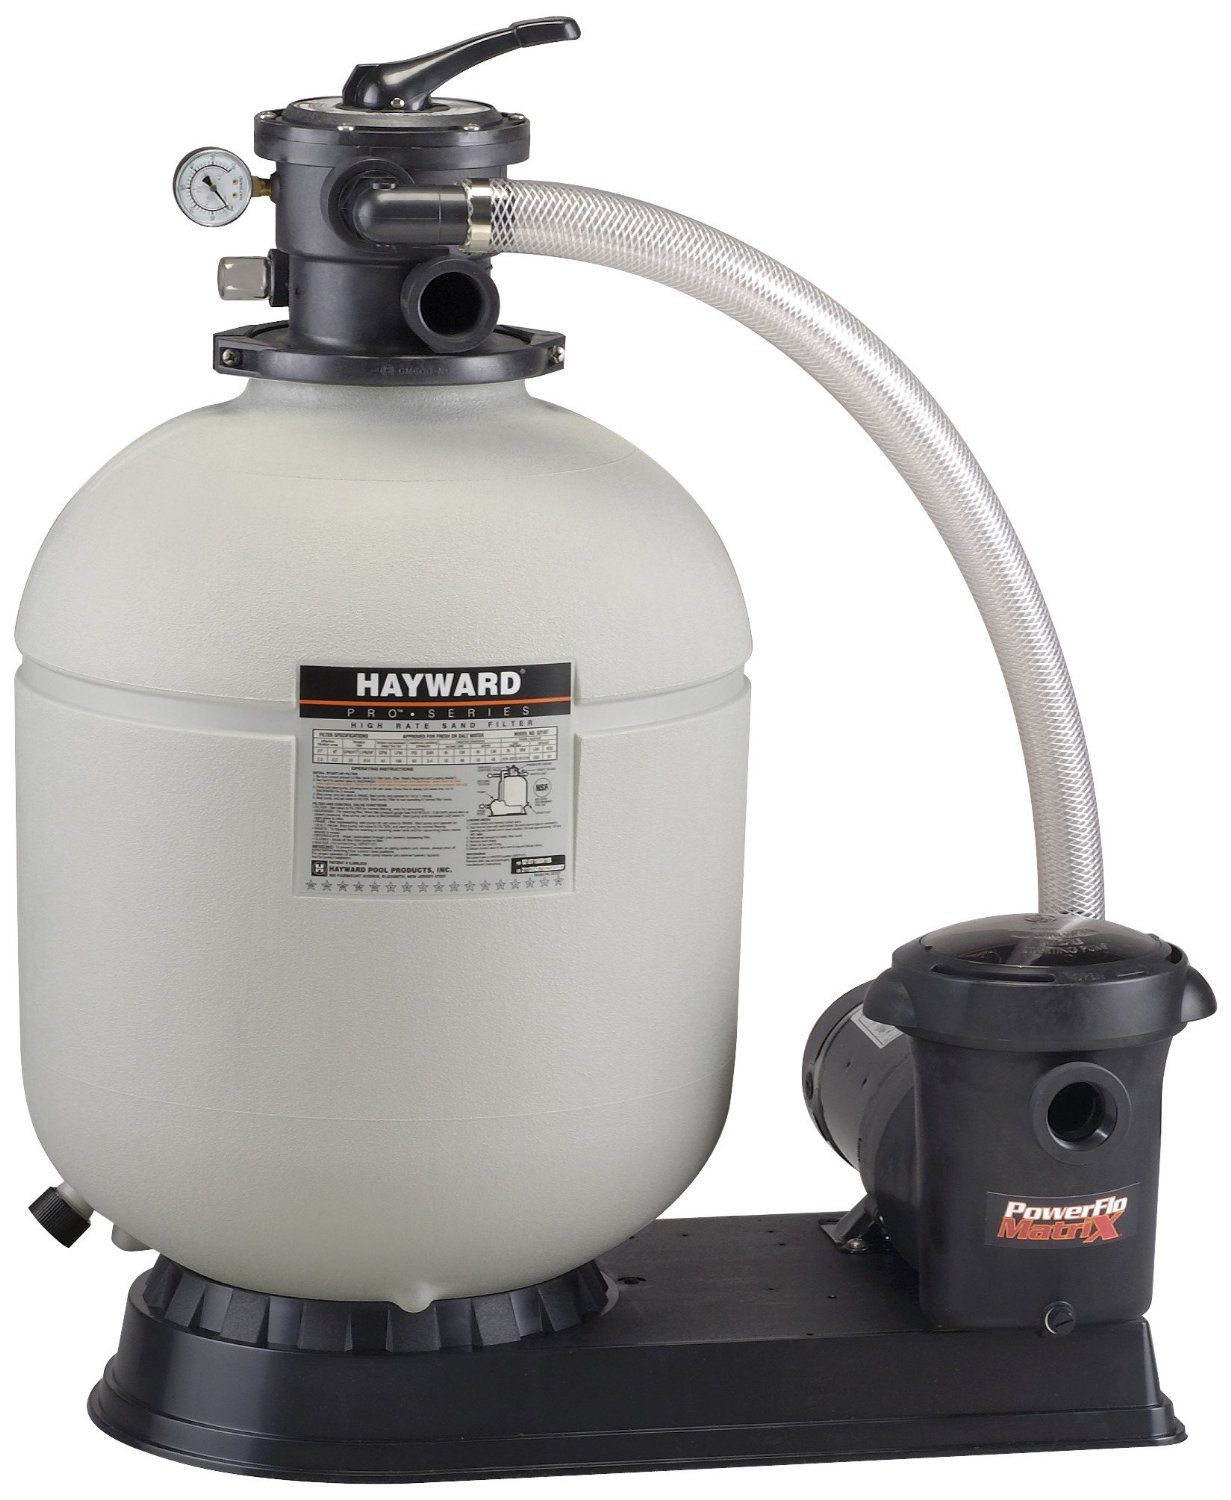 Above Ground Pool Filter System Store, 53% OFF | www.gruposincom.es